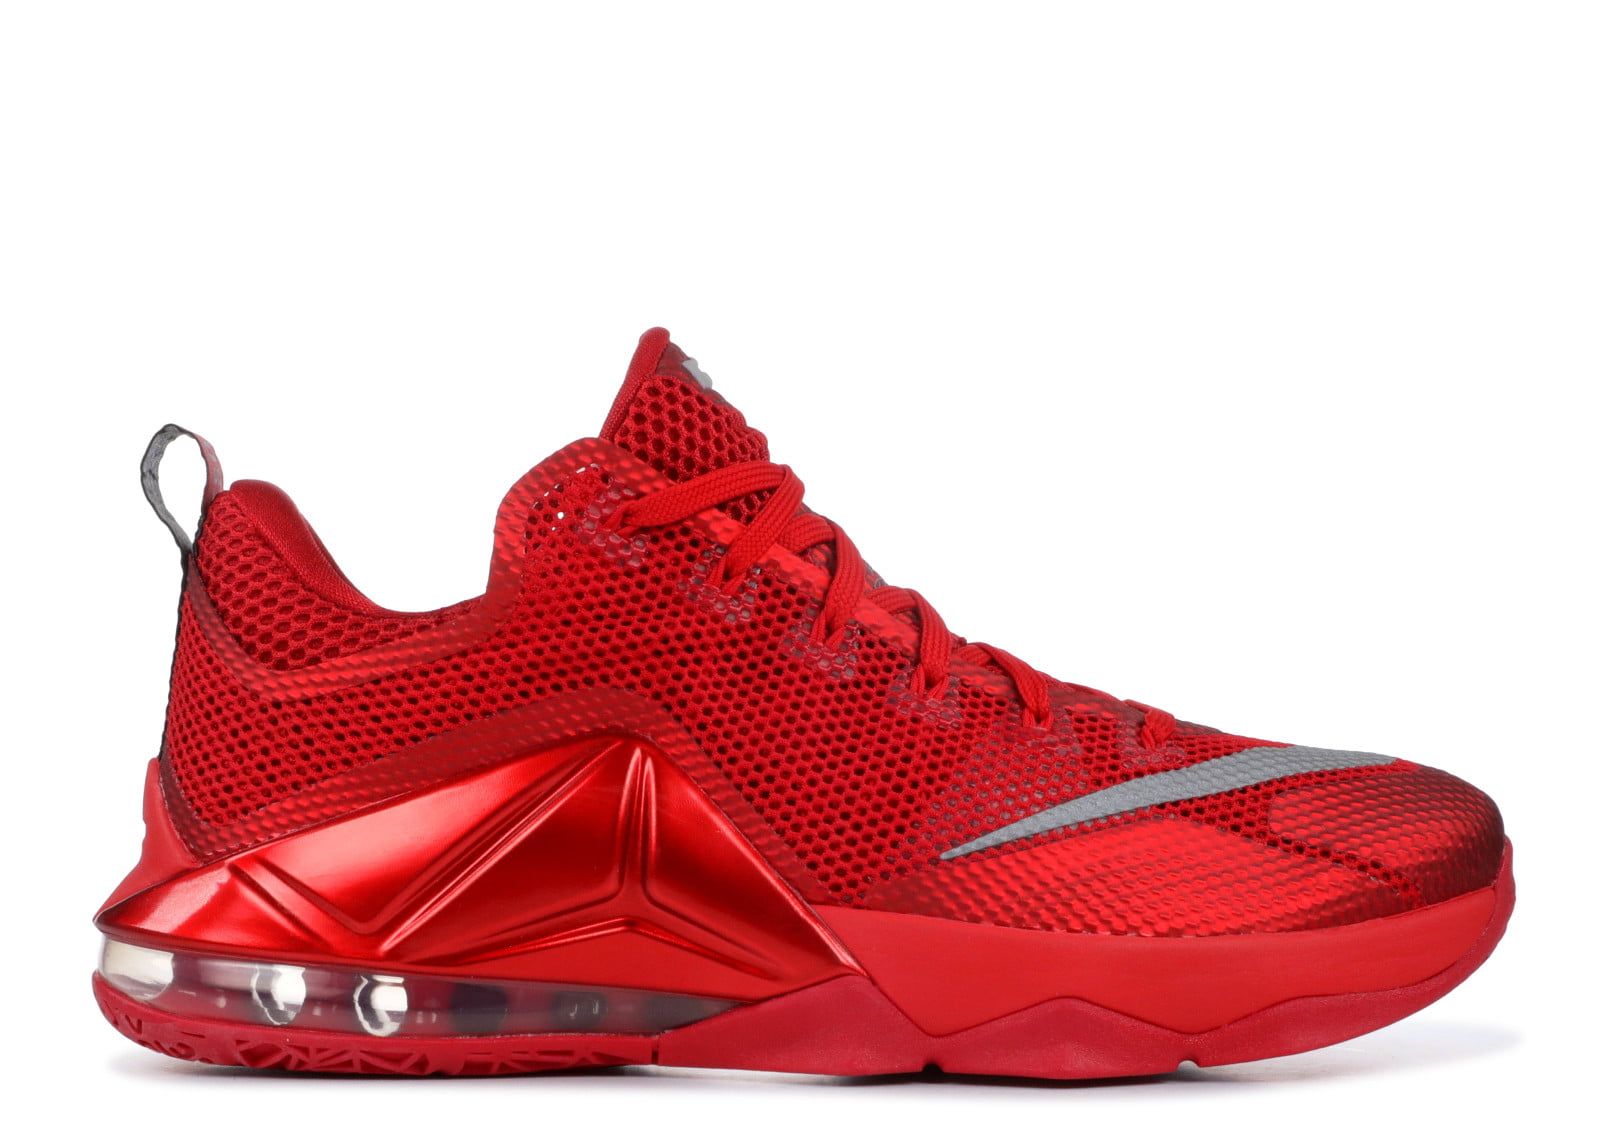 red low top lebrons